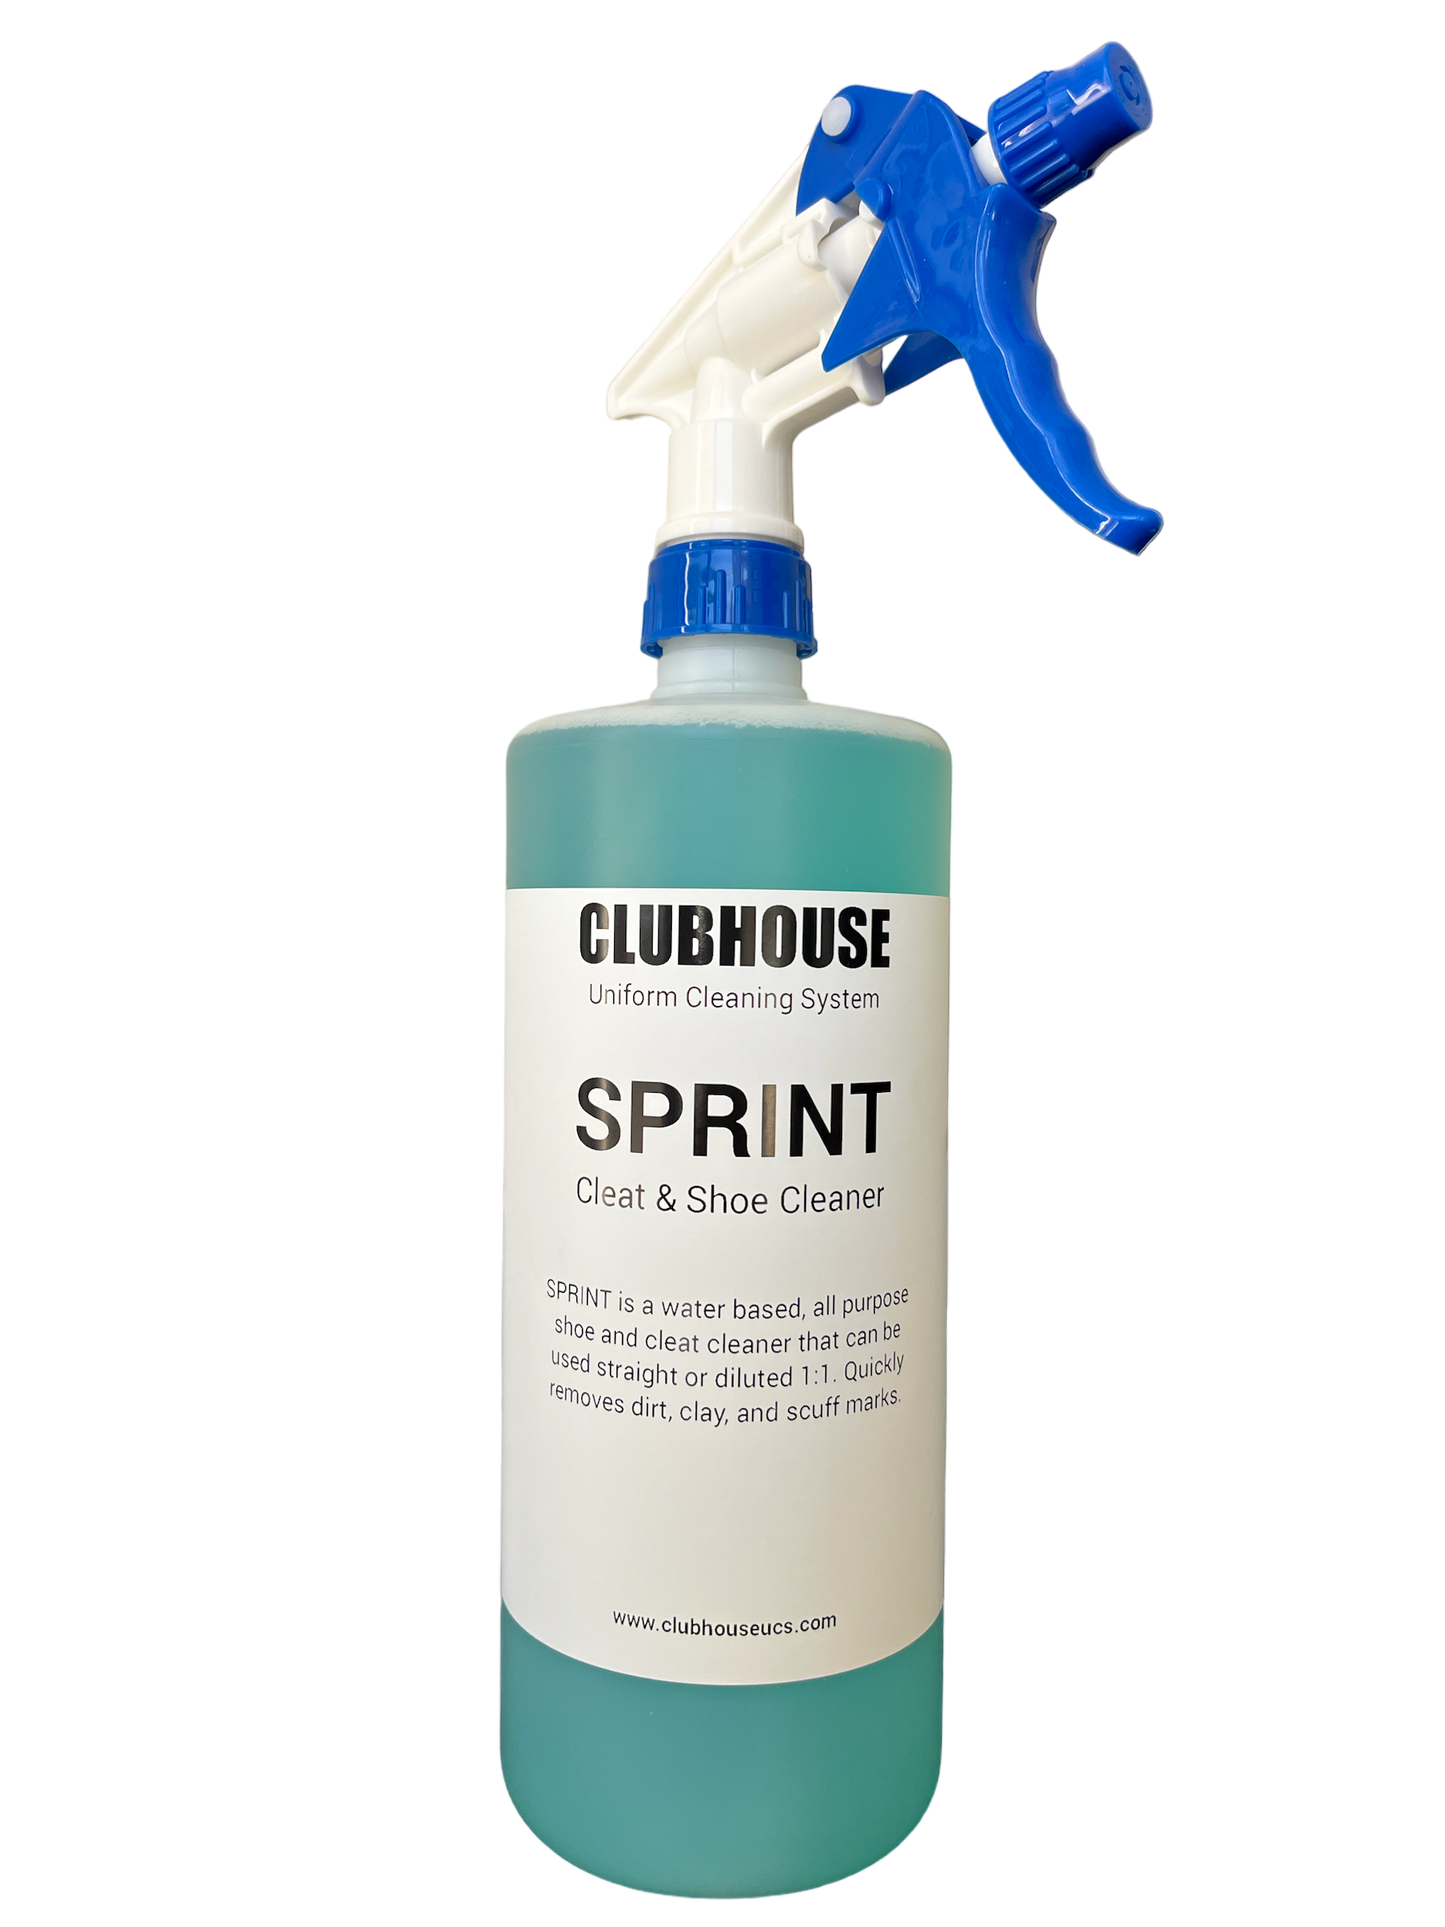 SPRINT - Cleat & Shoe Cleaner